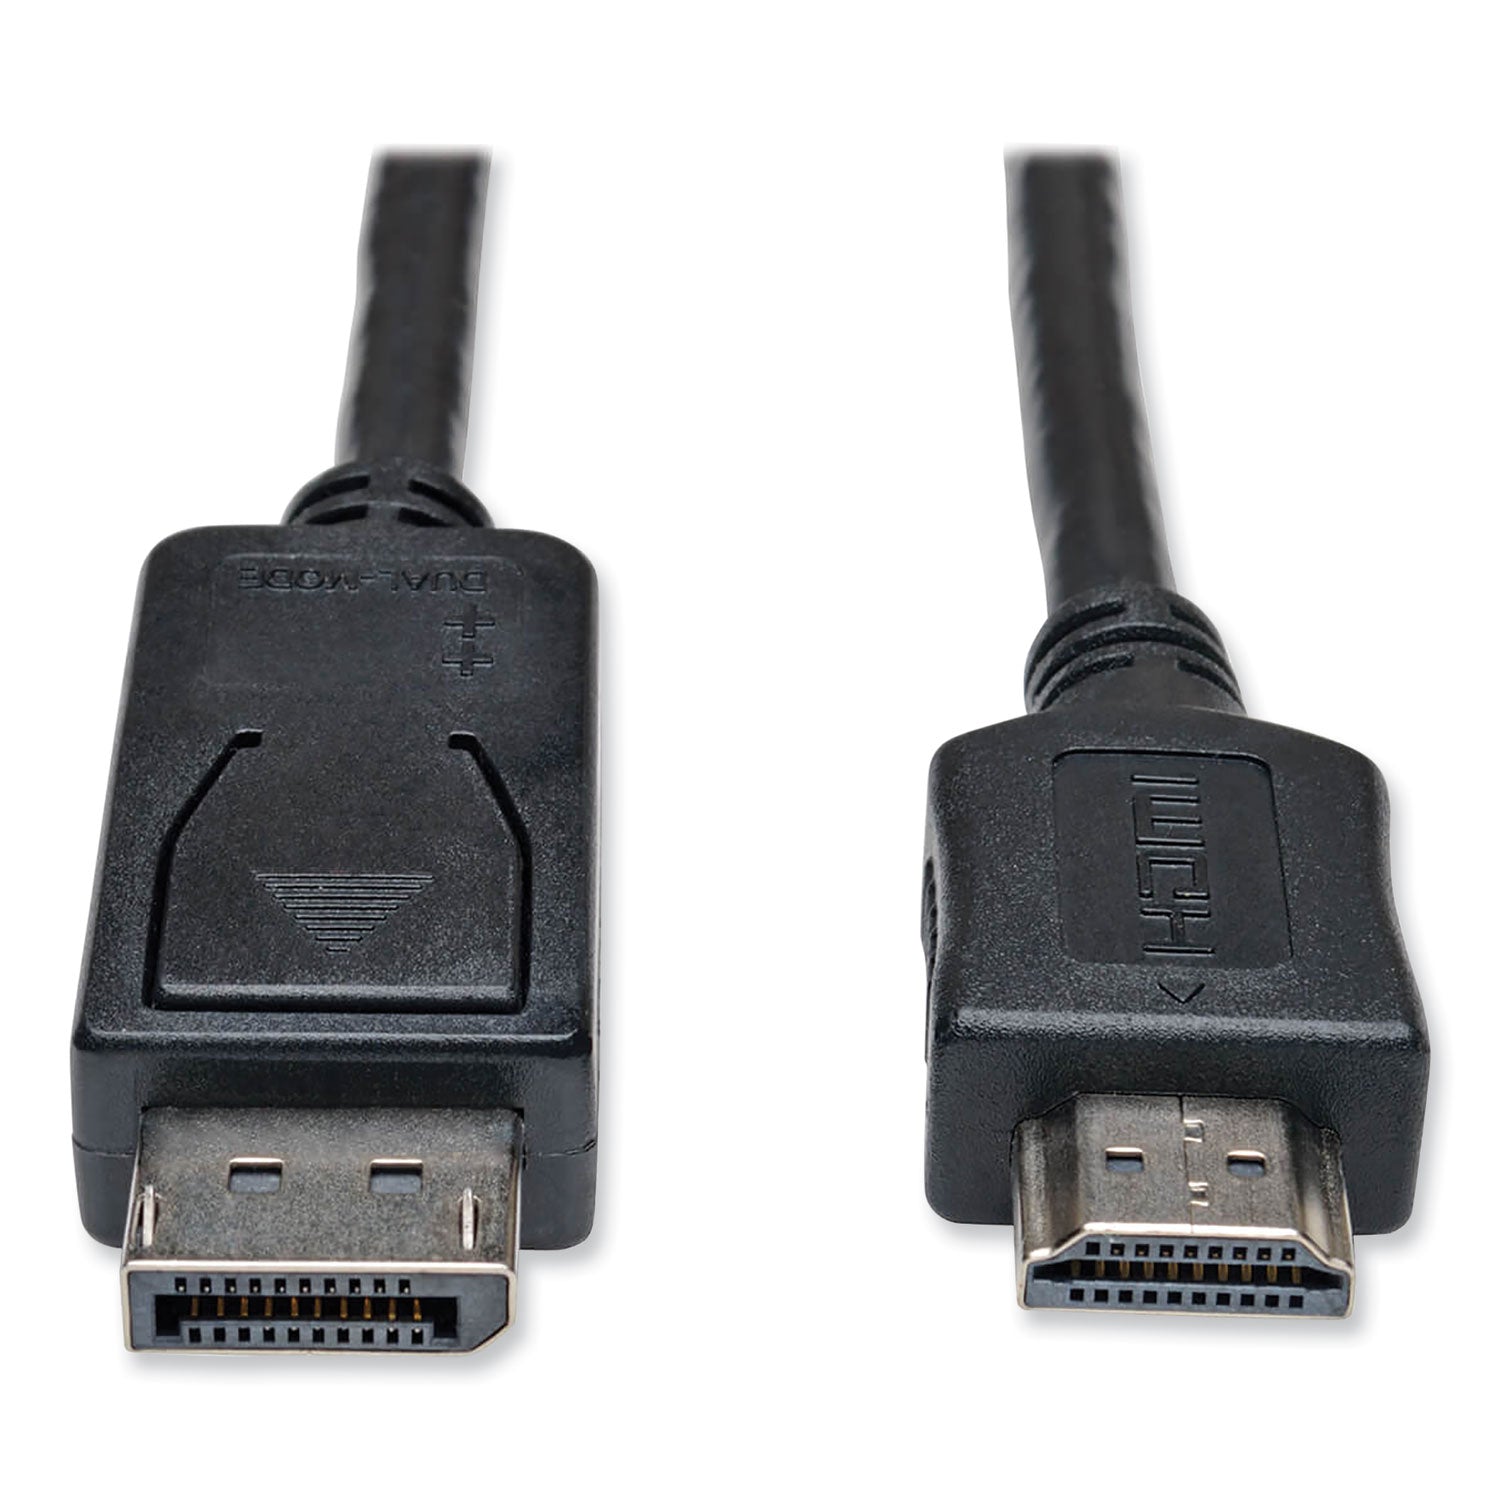 displayport-to-hdmi-cable-adapter-10-ft-black_trpp582010 - 1